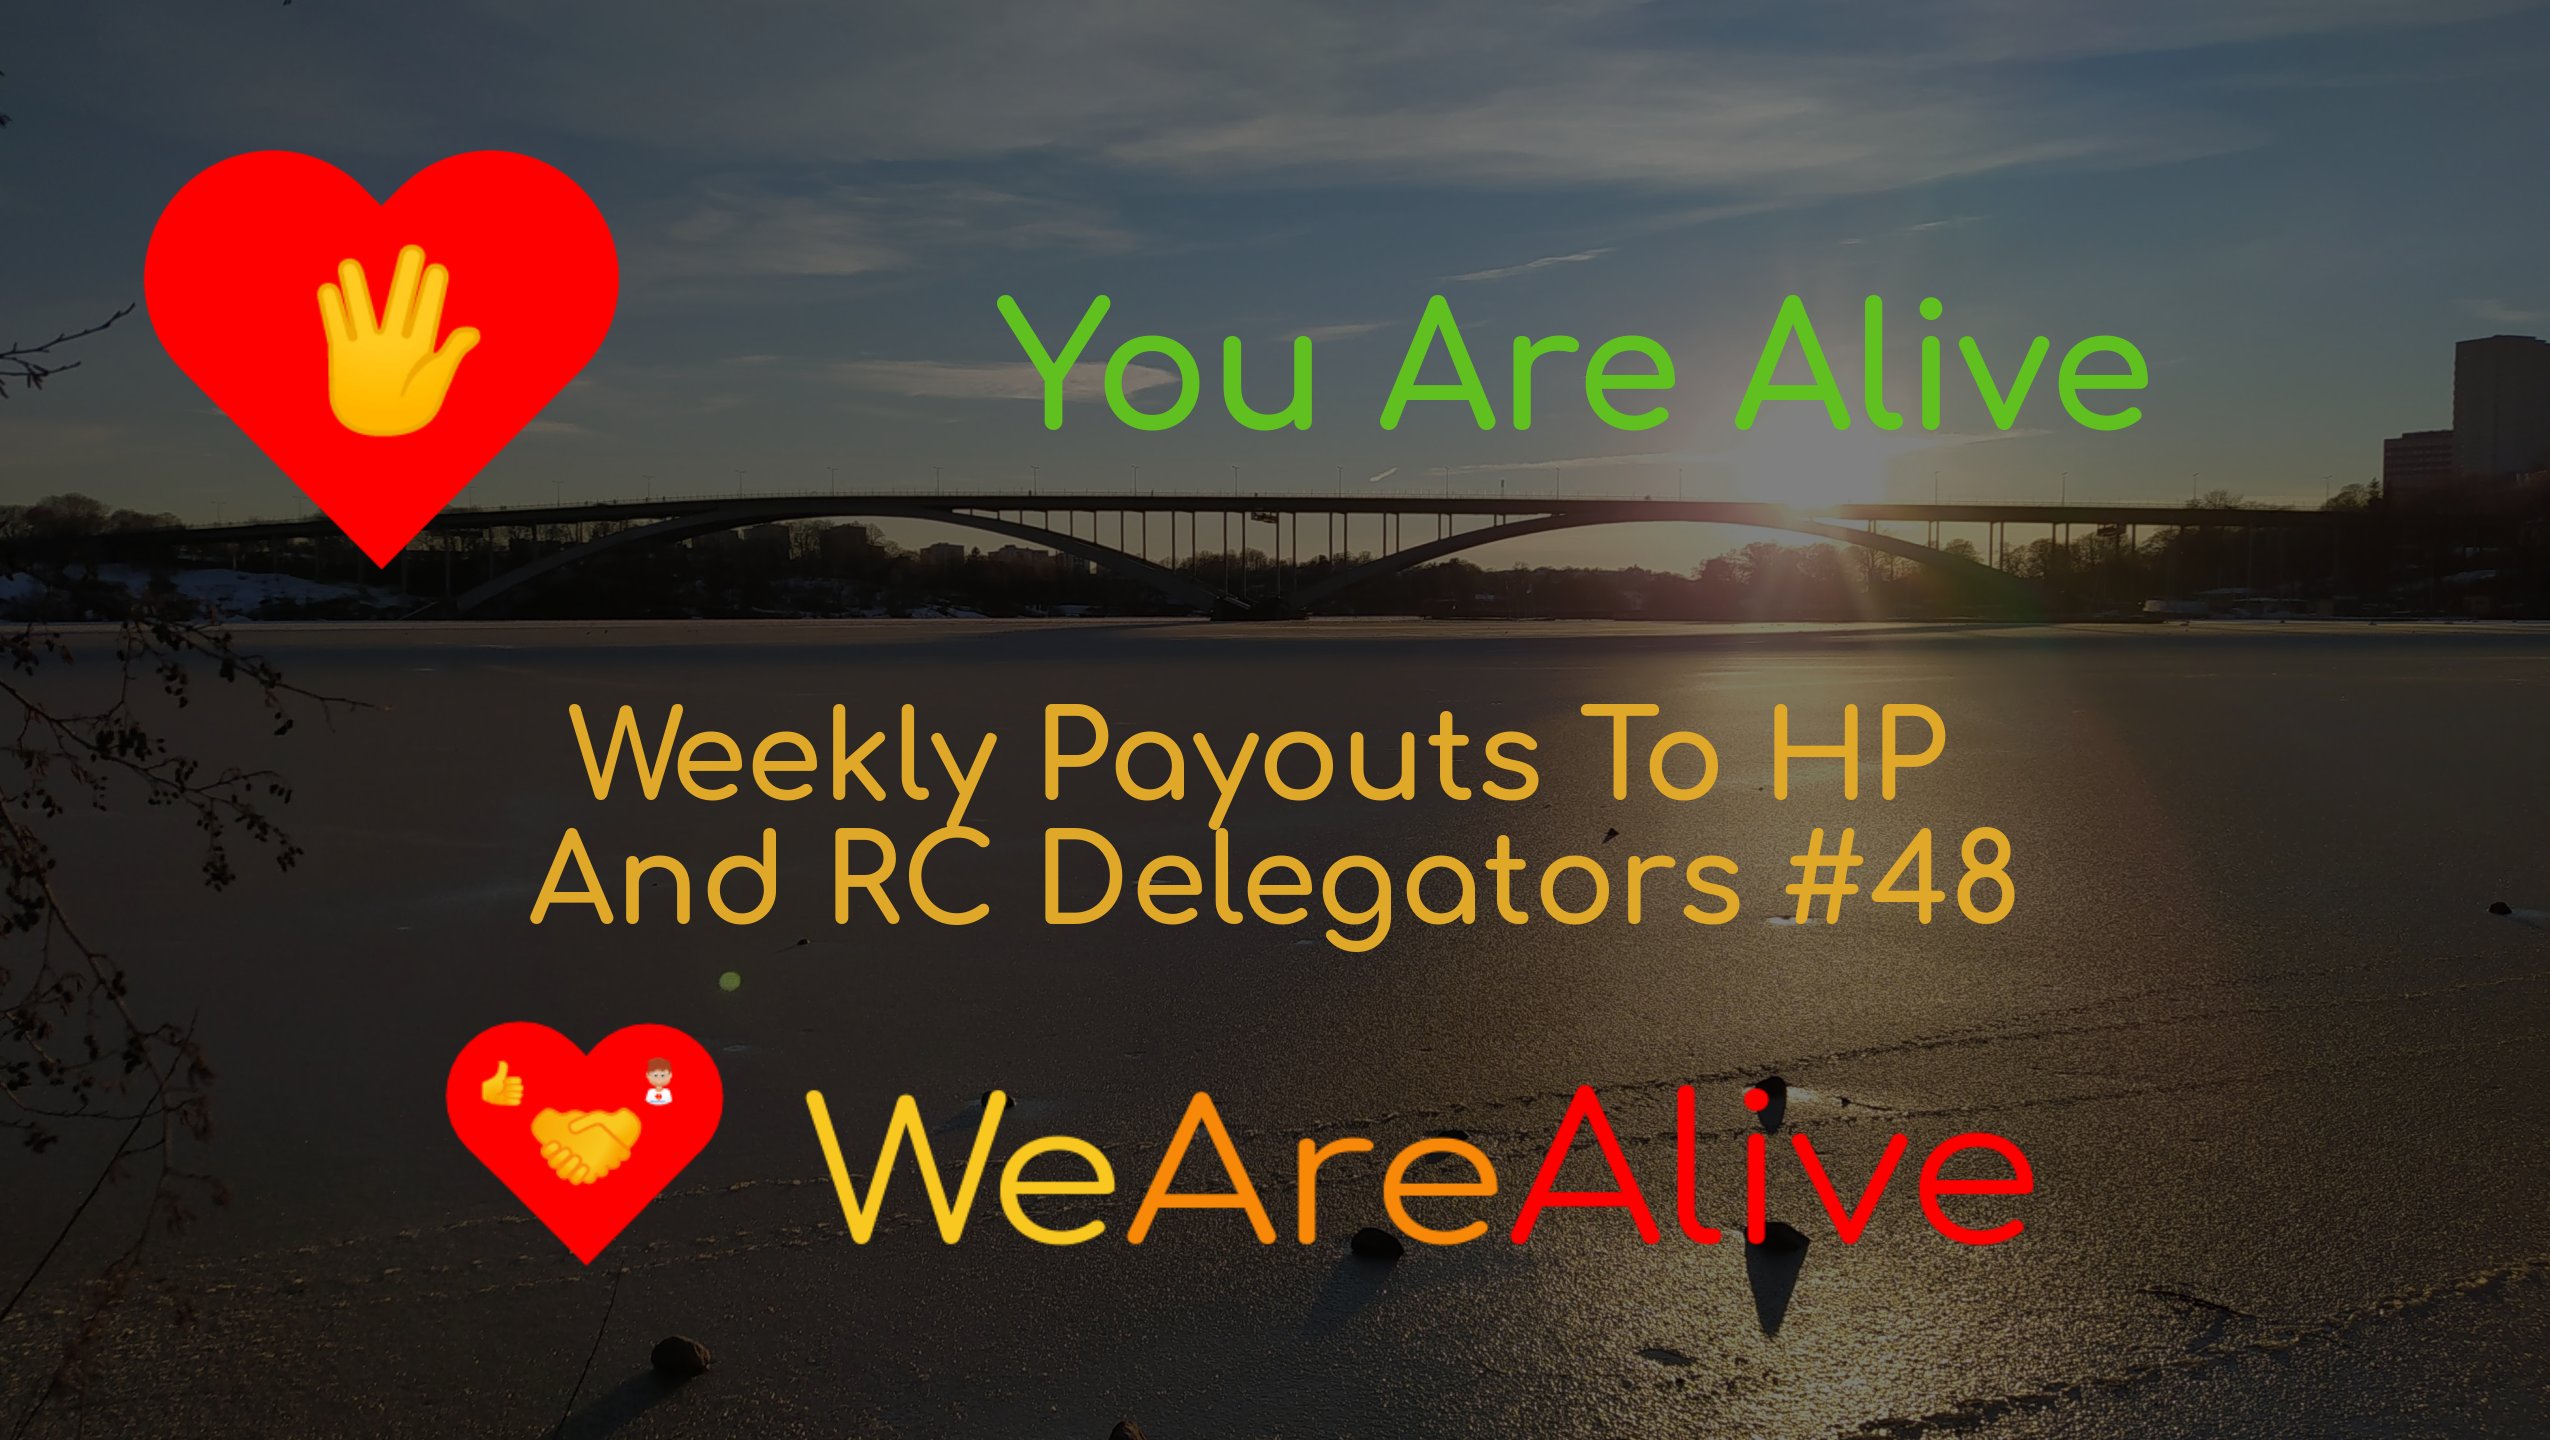 @youarealive/you-are-alive-weekly-payouts-to-hp-and-rc-delegators-48